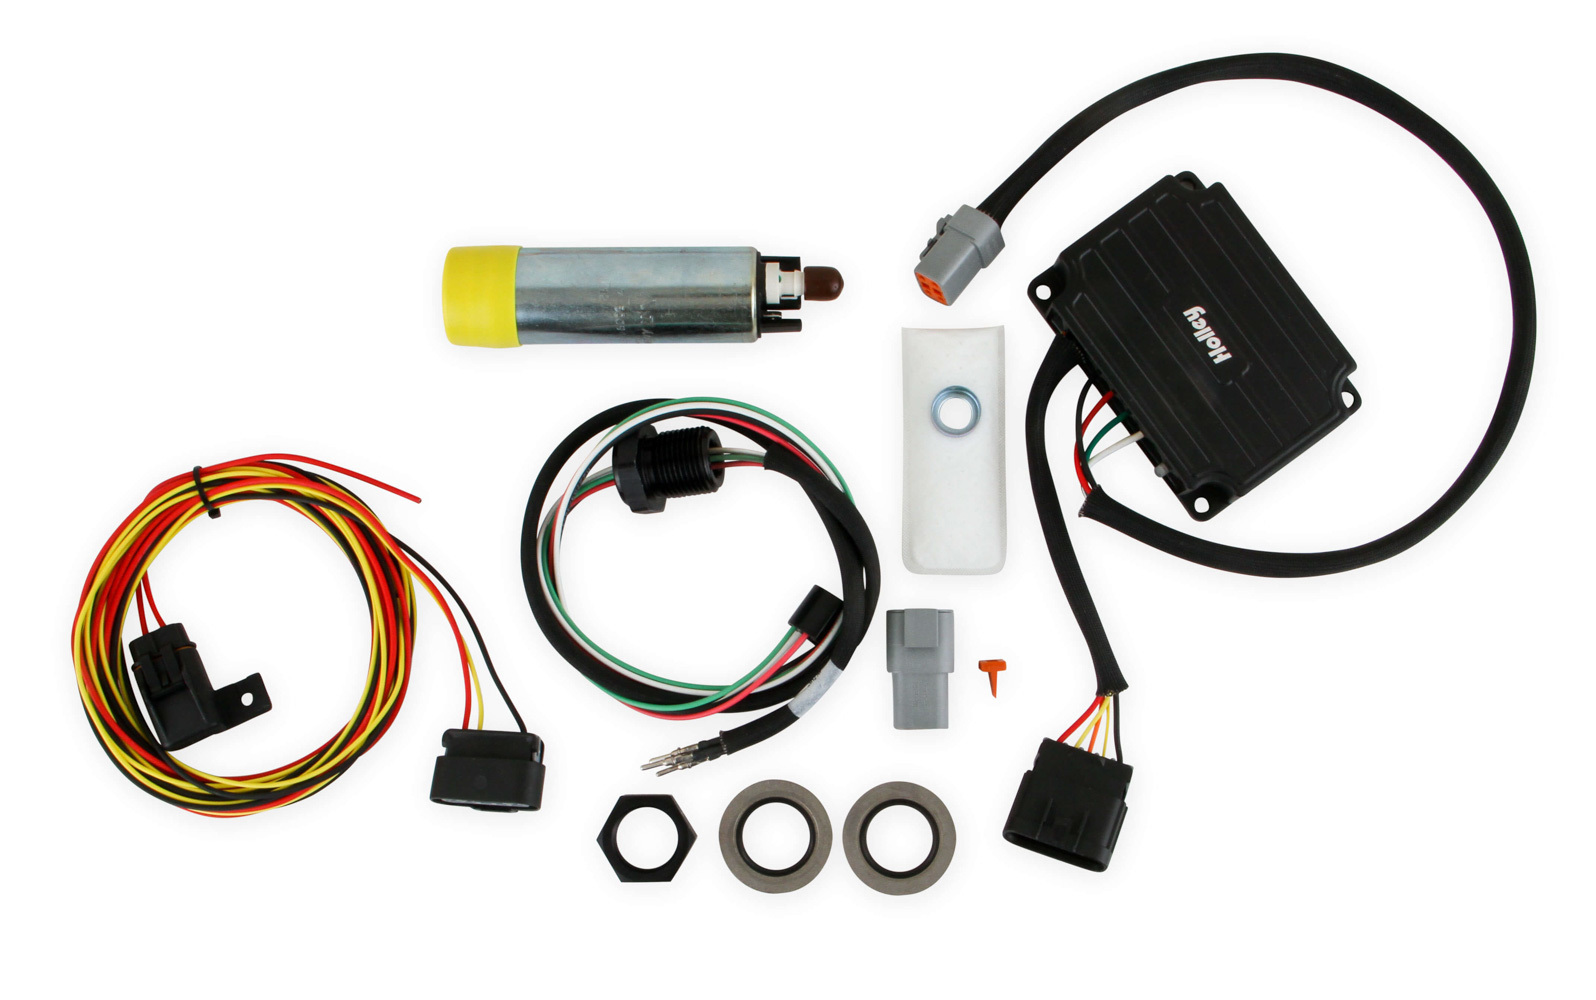 Holley 12-768 Fuel Pump, Electric, In-Tank, 335 gph at 130 psi, Female Straight Cut O-Ring Outlet, 12V, Universal, Kit